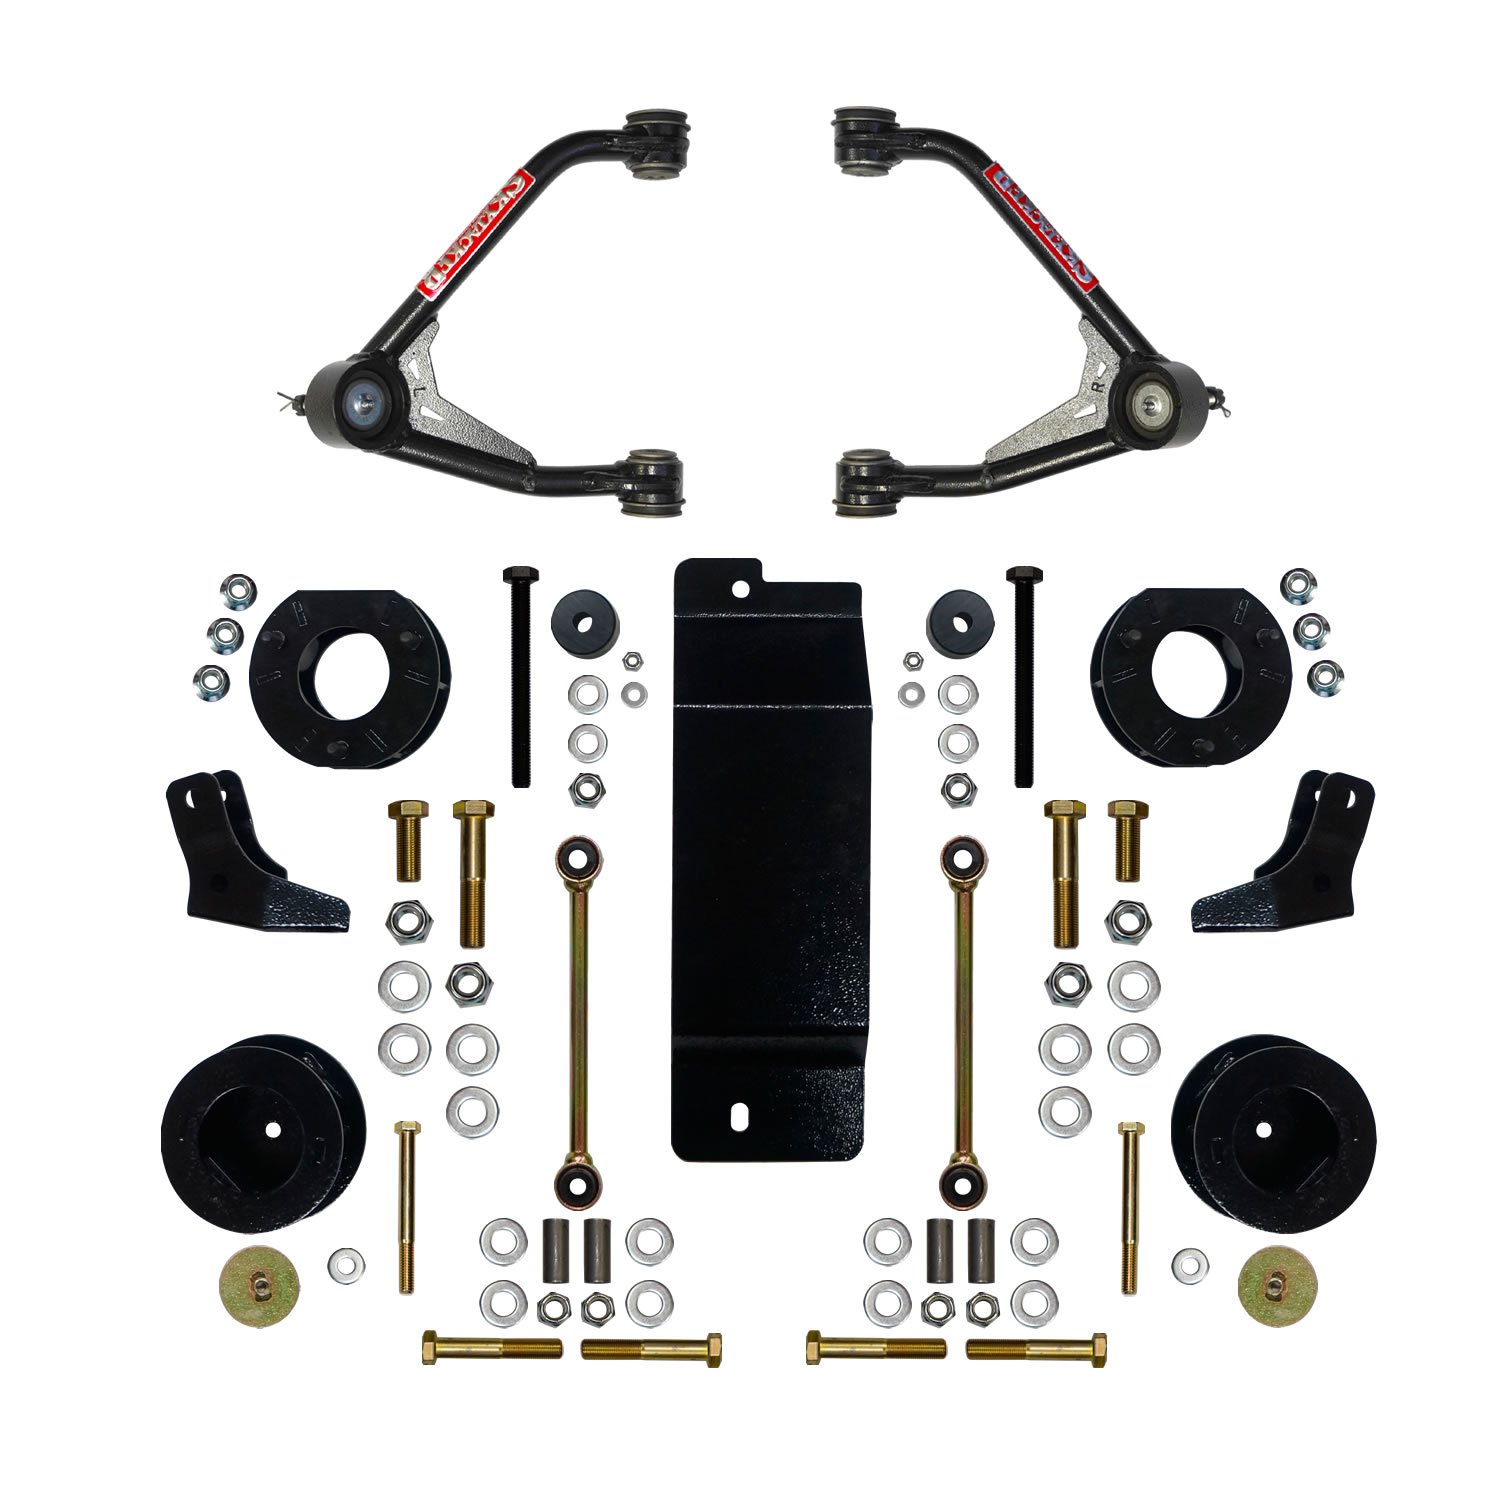 3.500-4.000 In. Upper Control Arm Lift Kit with Rear Shock Brackets for 2007-2014 GM